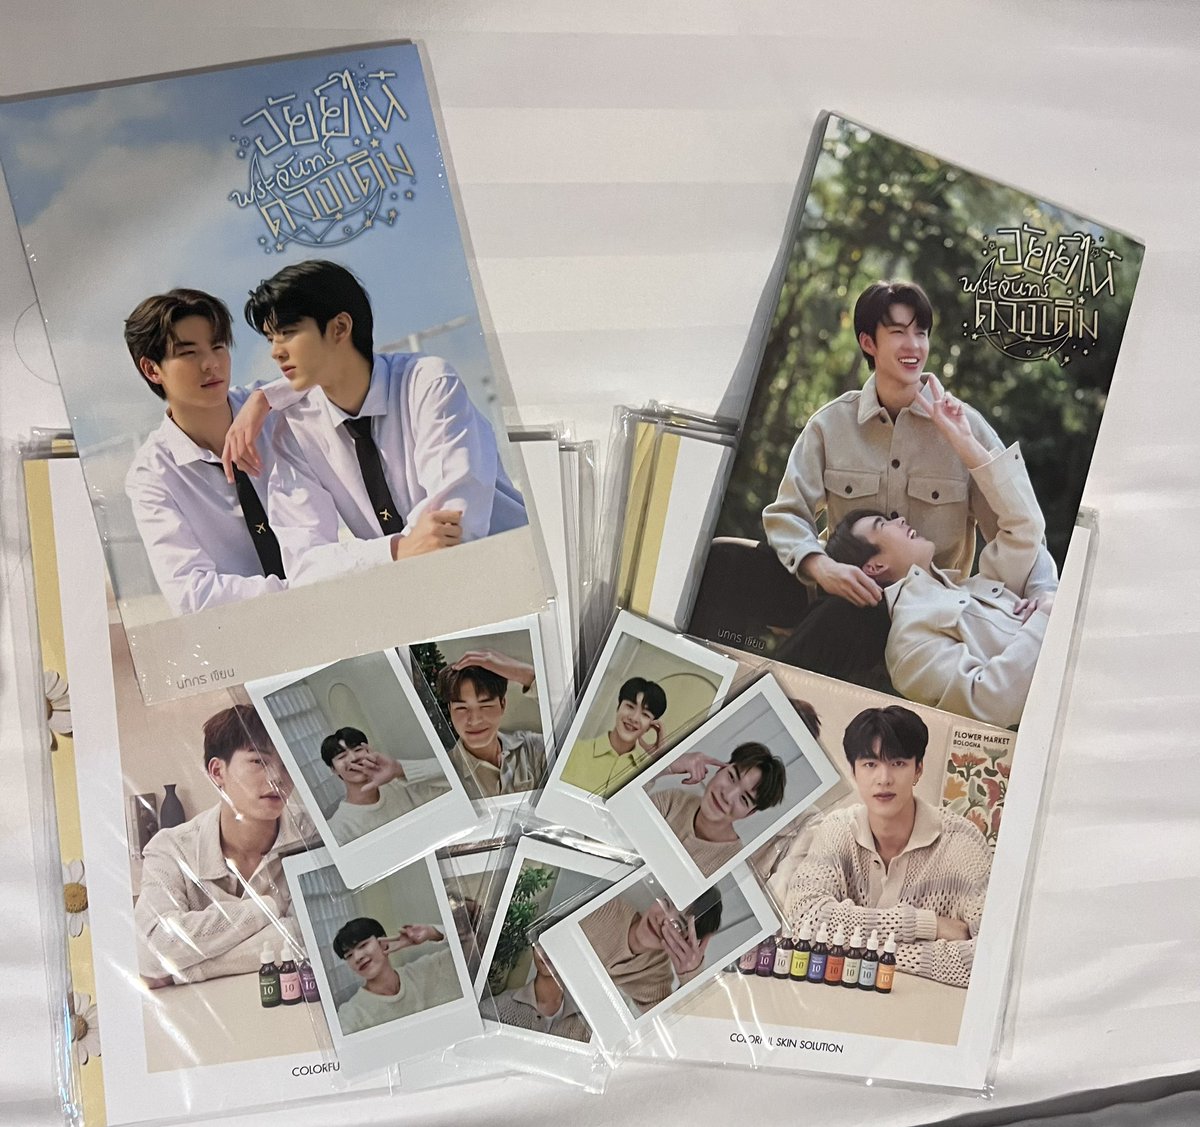 ｛giveaway｝
To thank me I found 2:1🥹🙇🏻‍♀️
Very cute itsskin polaroid photos*8 AiLongNhai novel*4 Each gift comes with an itsskin magazine. Let’s take these cute things home, shall we? Plz DM na☺️💖👊🏻
 #MeenPing_ToMyDear